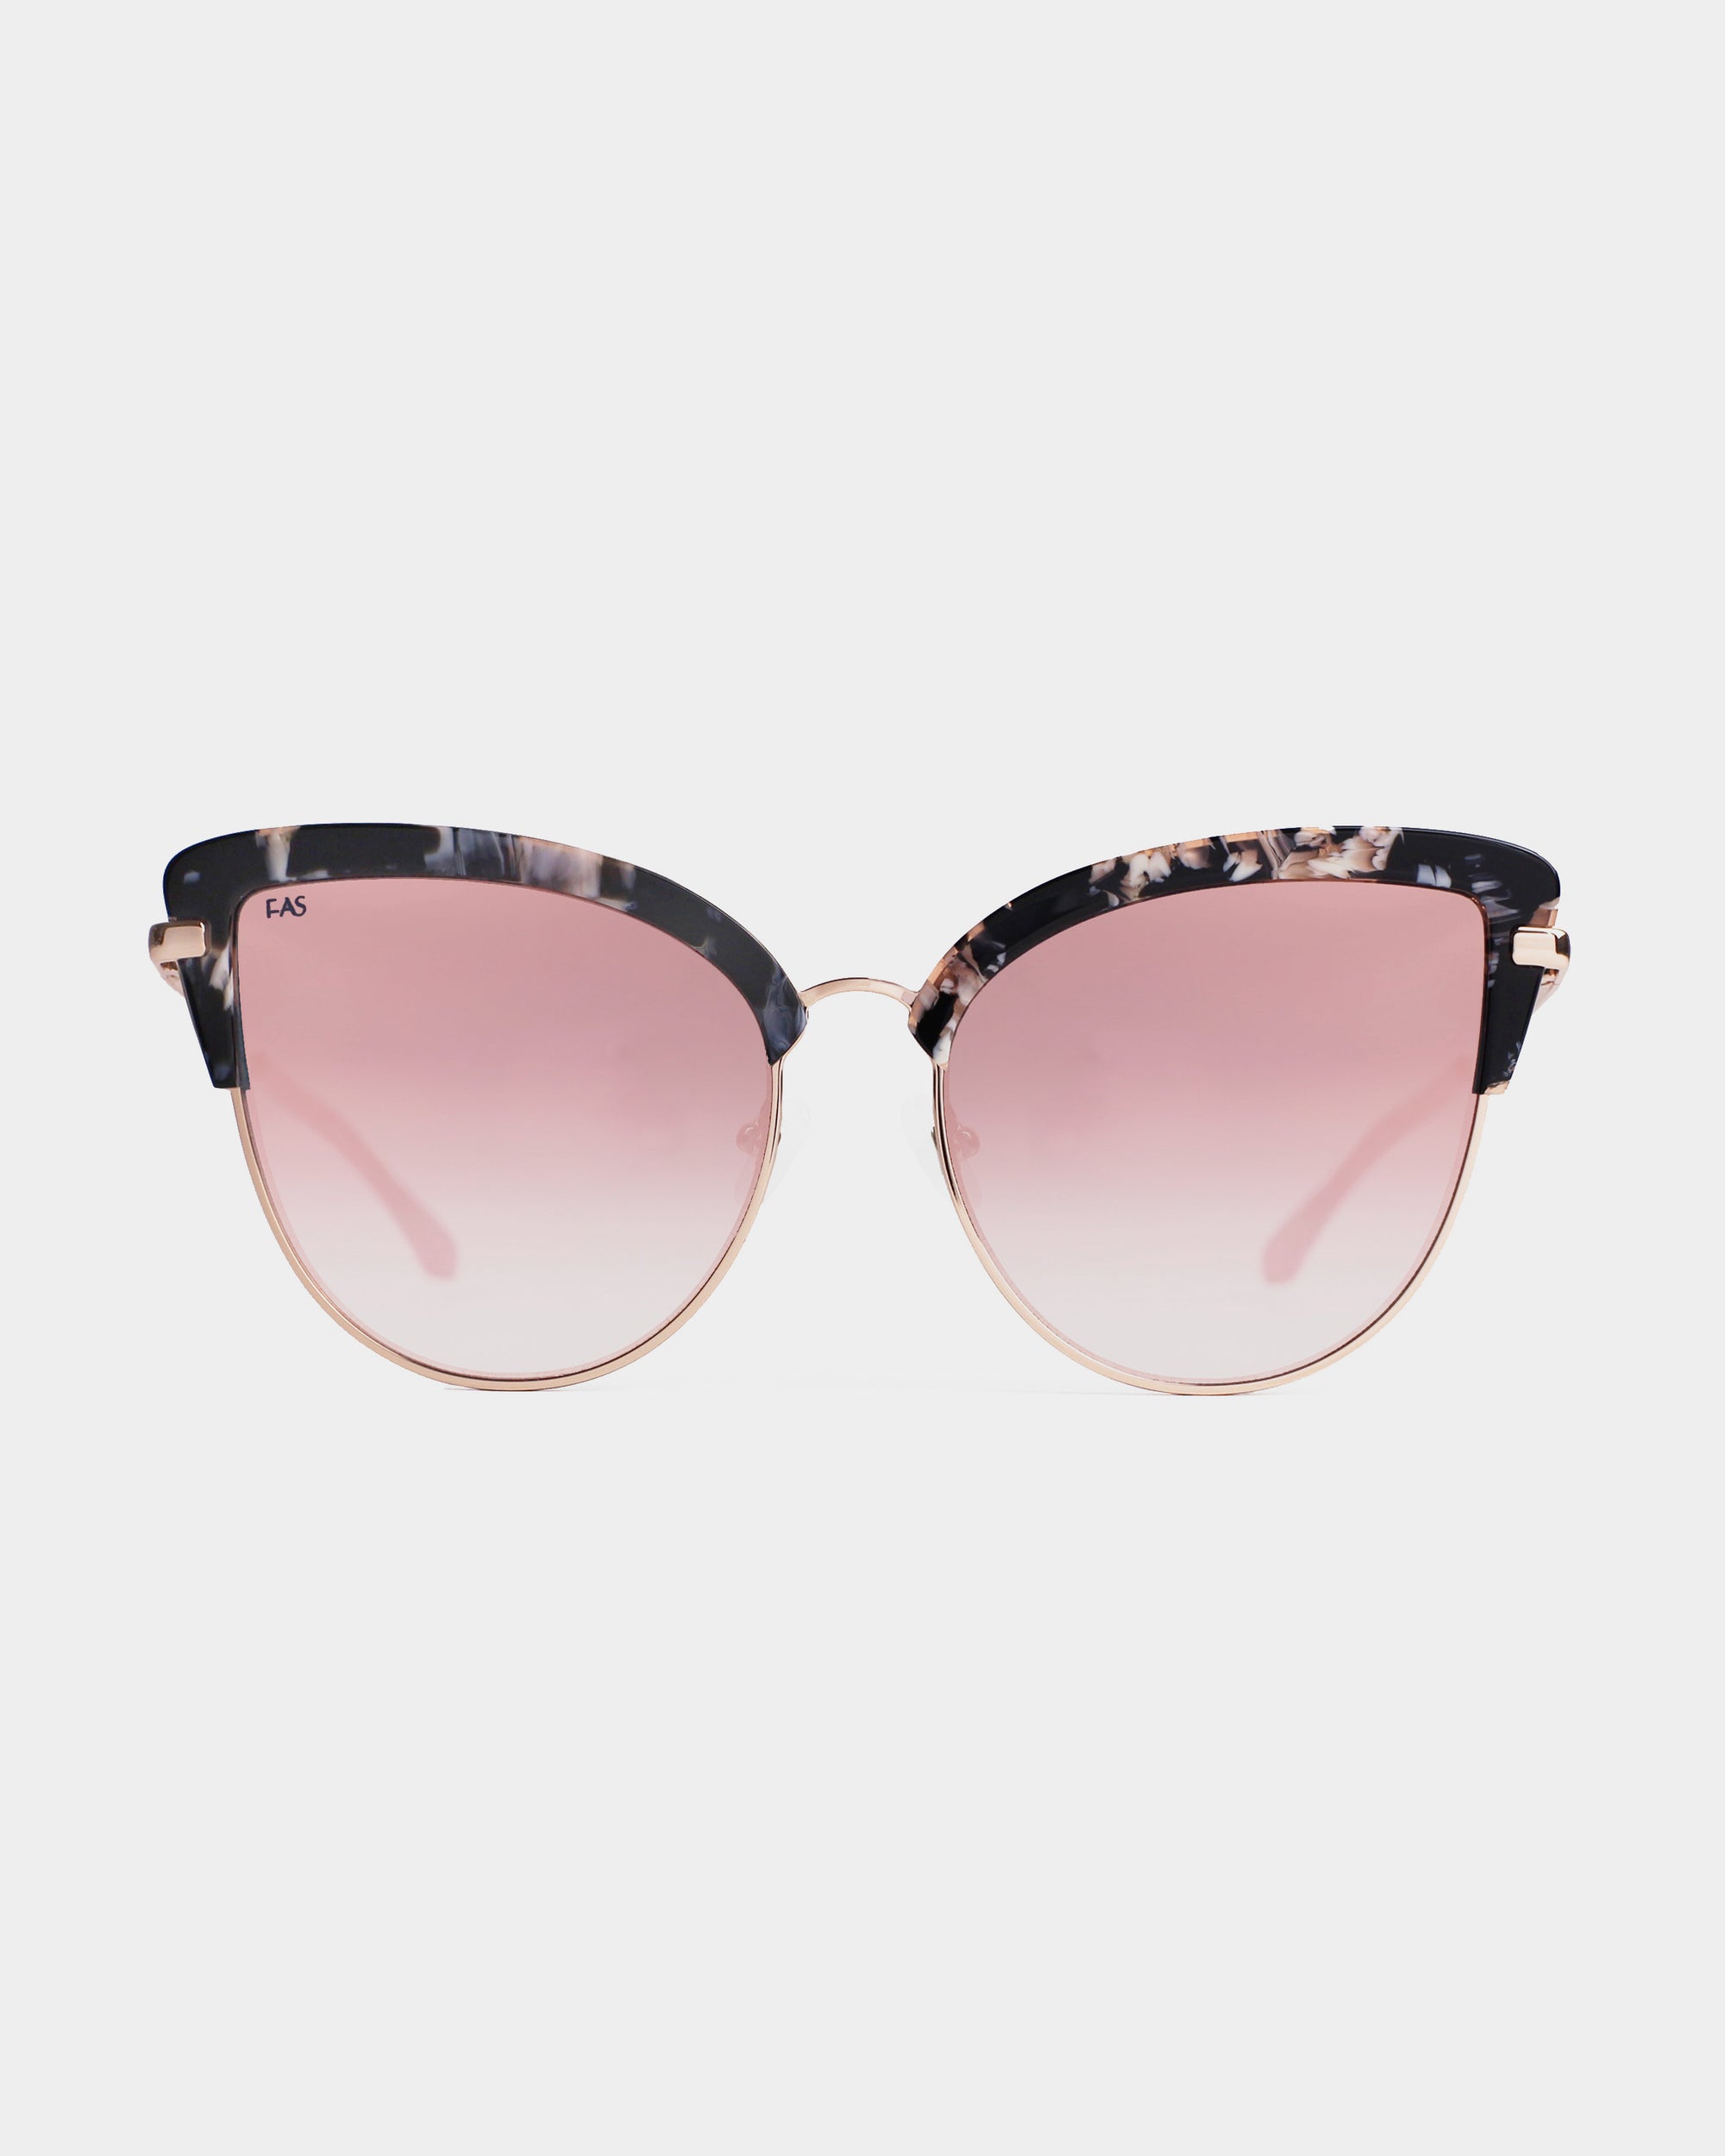 A pair of cat-eye sunglasses with a unique design. The top half of the frame features a black and white marbled pattern, while the lower half and the temples boast 18-karat gold plating. The nylon lenses are pink and gradient from darker at the top to lighter at the bottom. Introducing **Venus by For Art&#39;s Sake®**.